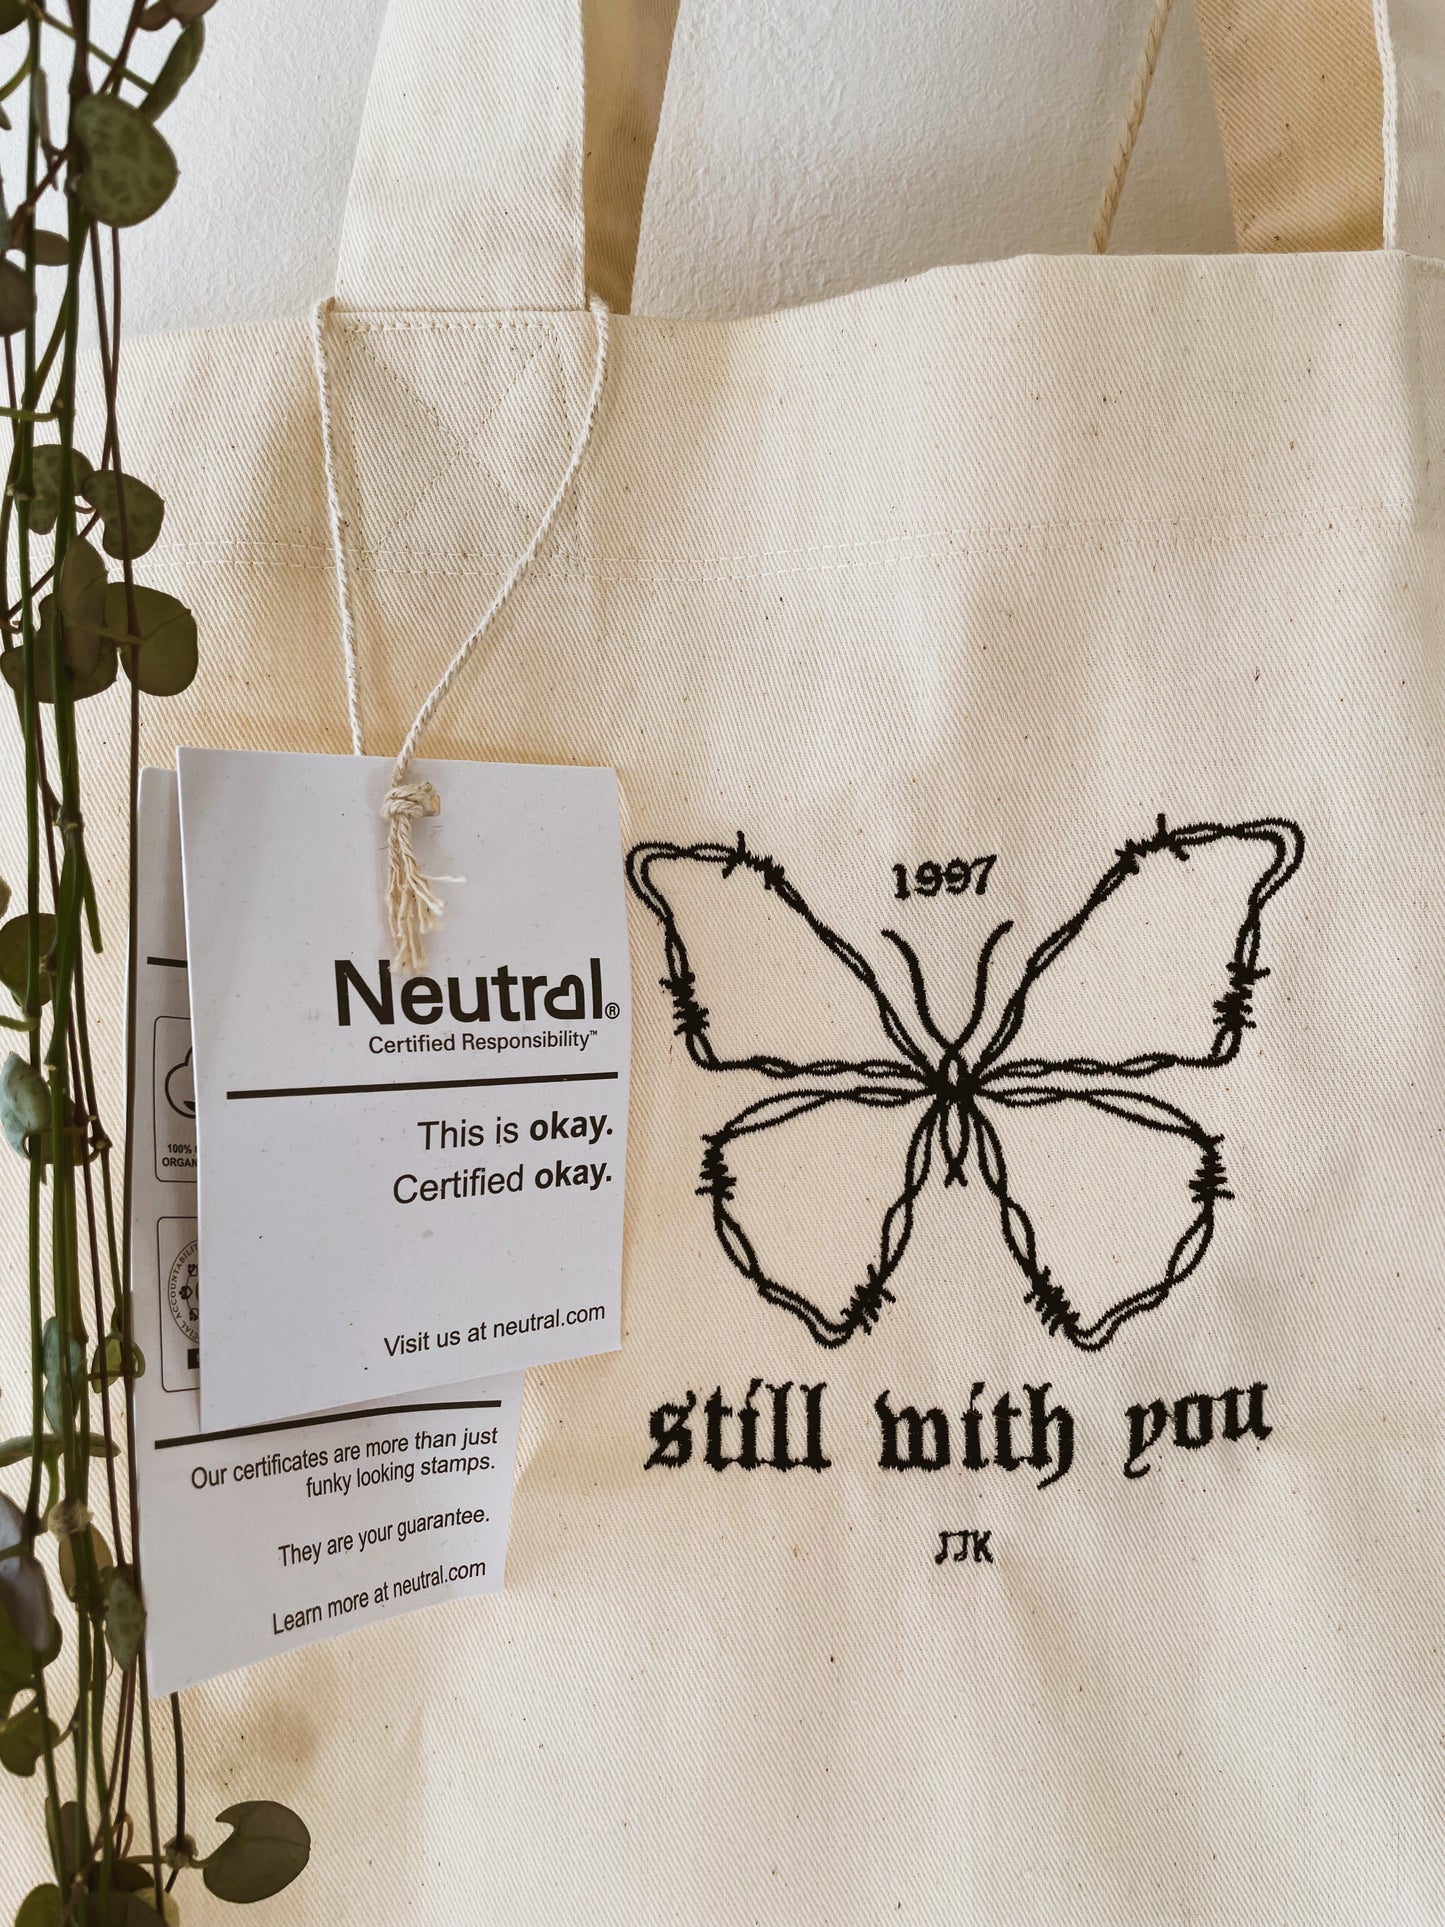 Still with you - Tote Bag